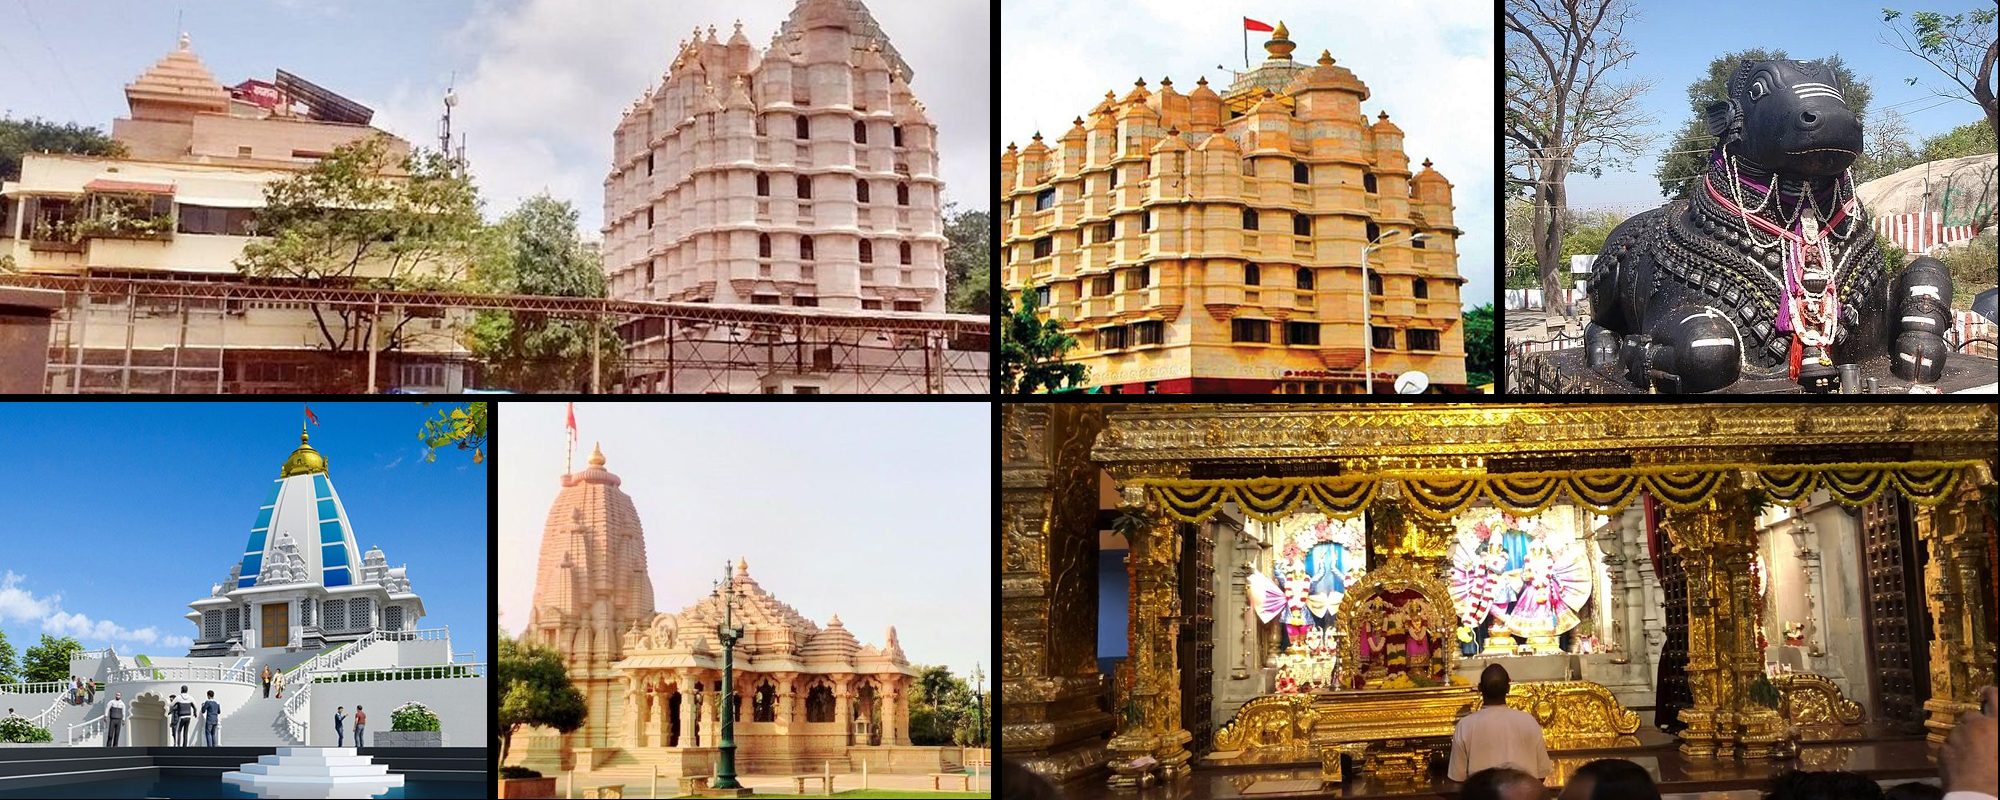 Indian Temple Architecture and Designs